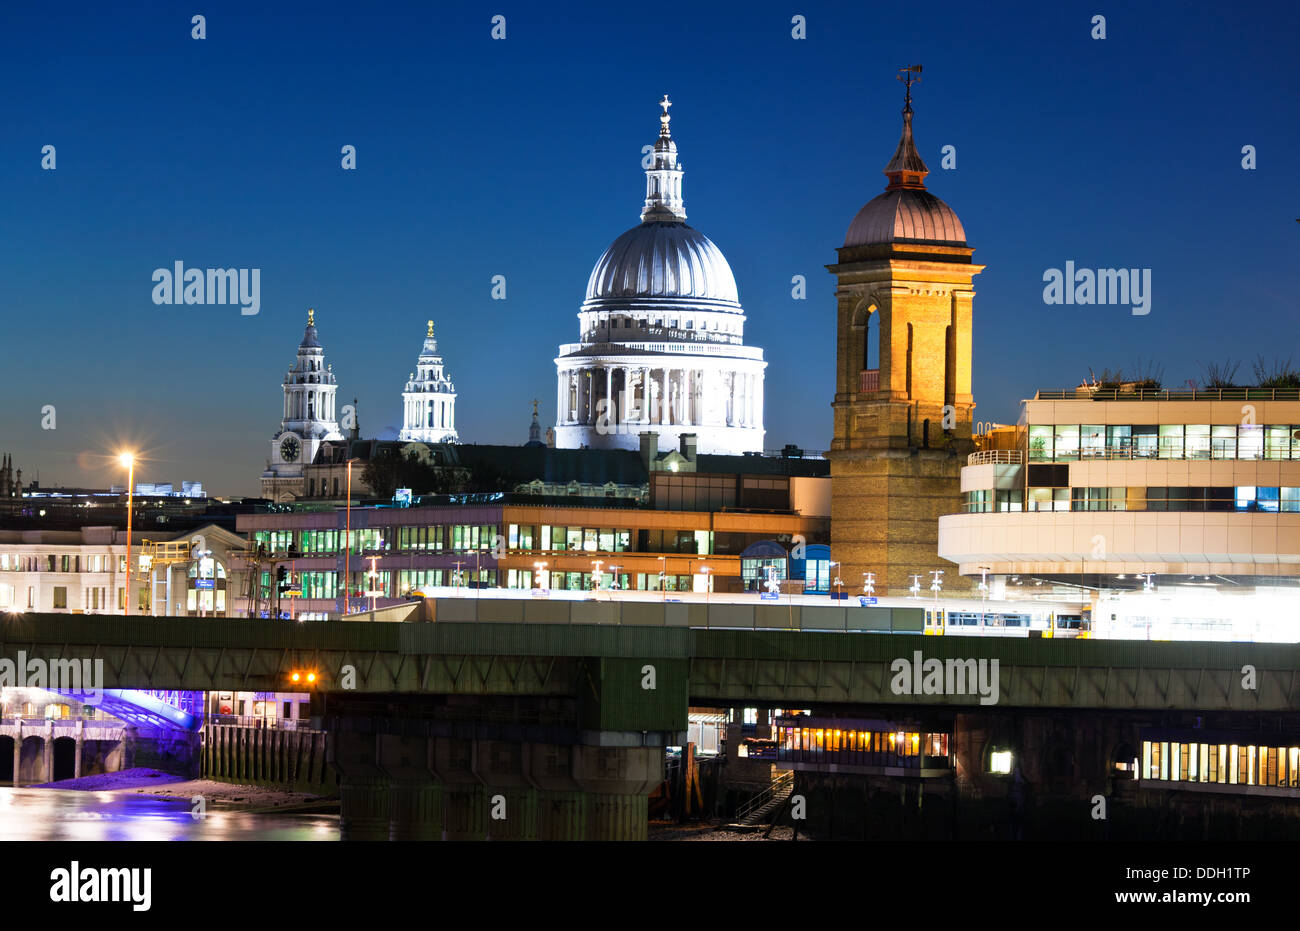 St. Pauls Cathedral Dome From London Bridge London UK Stock Photo